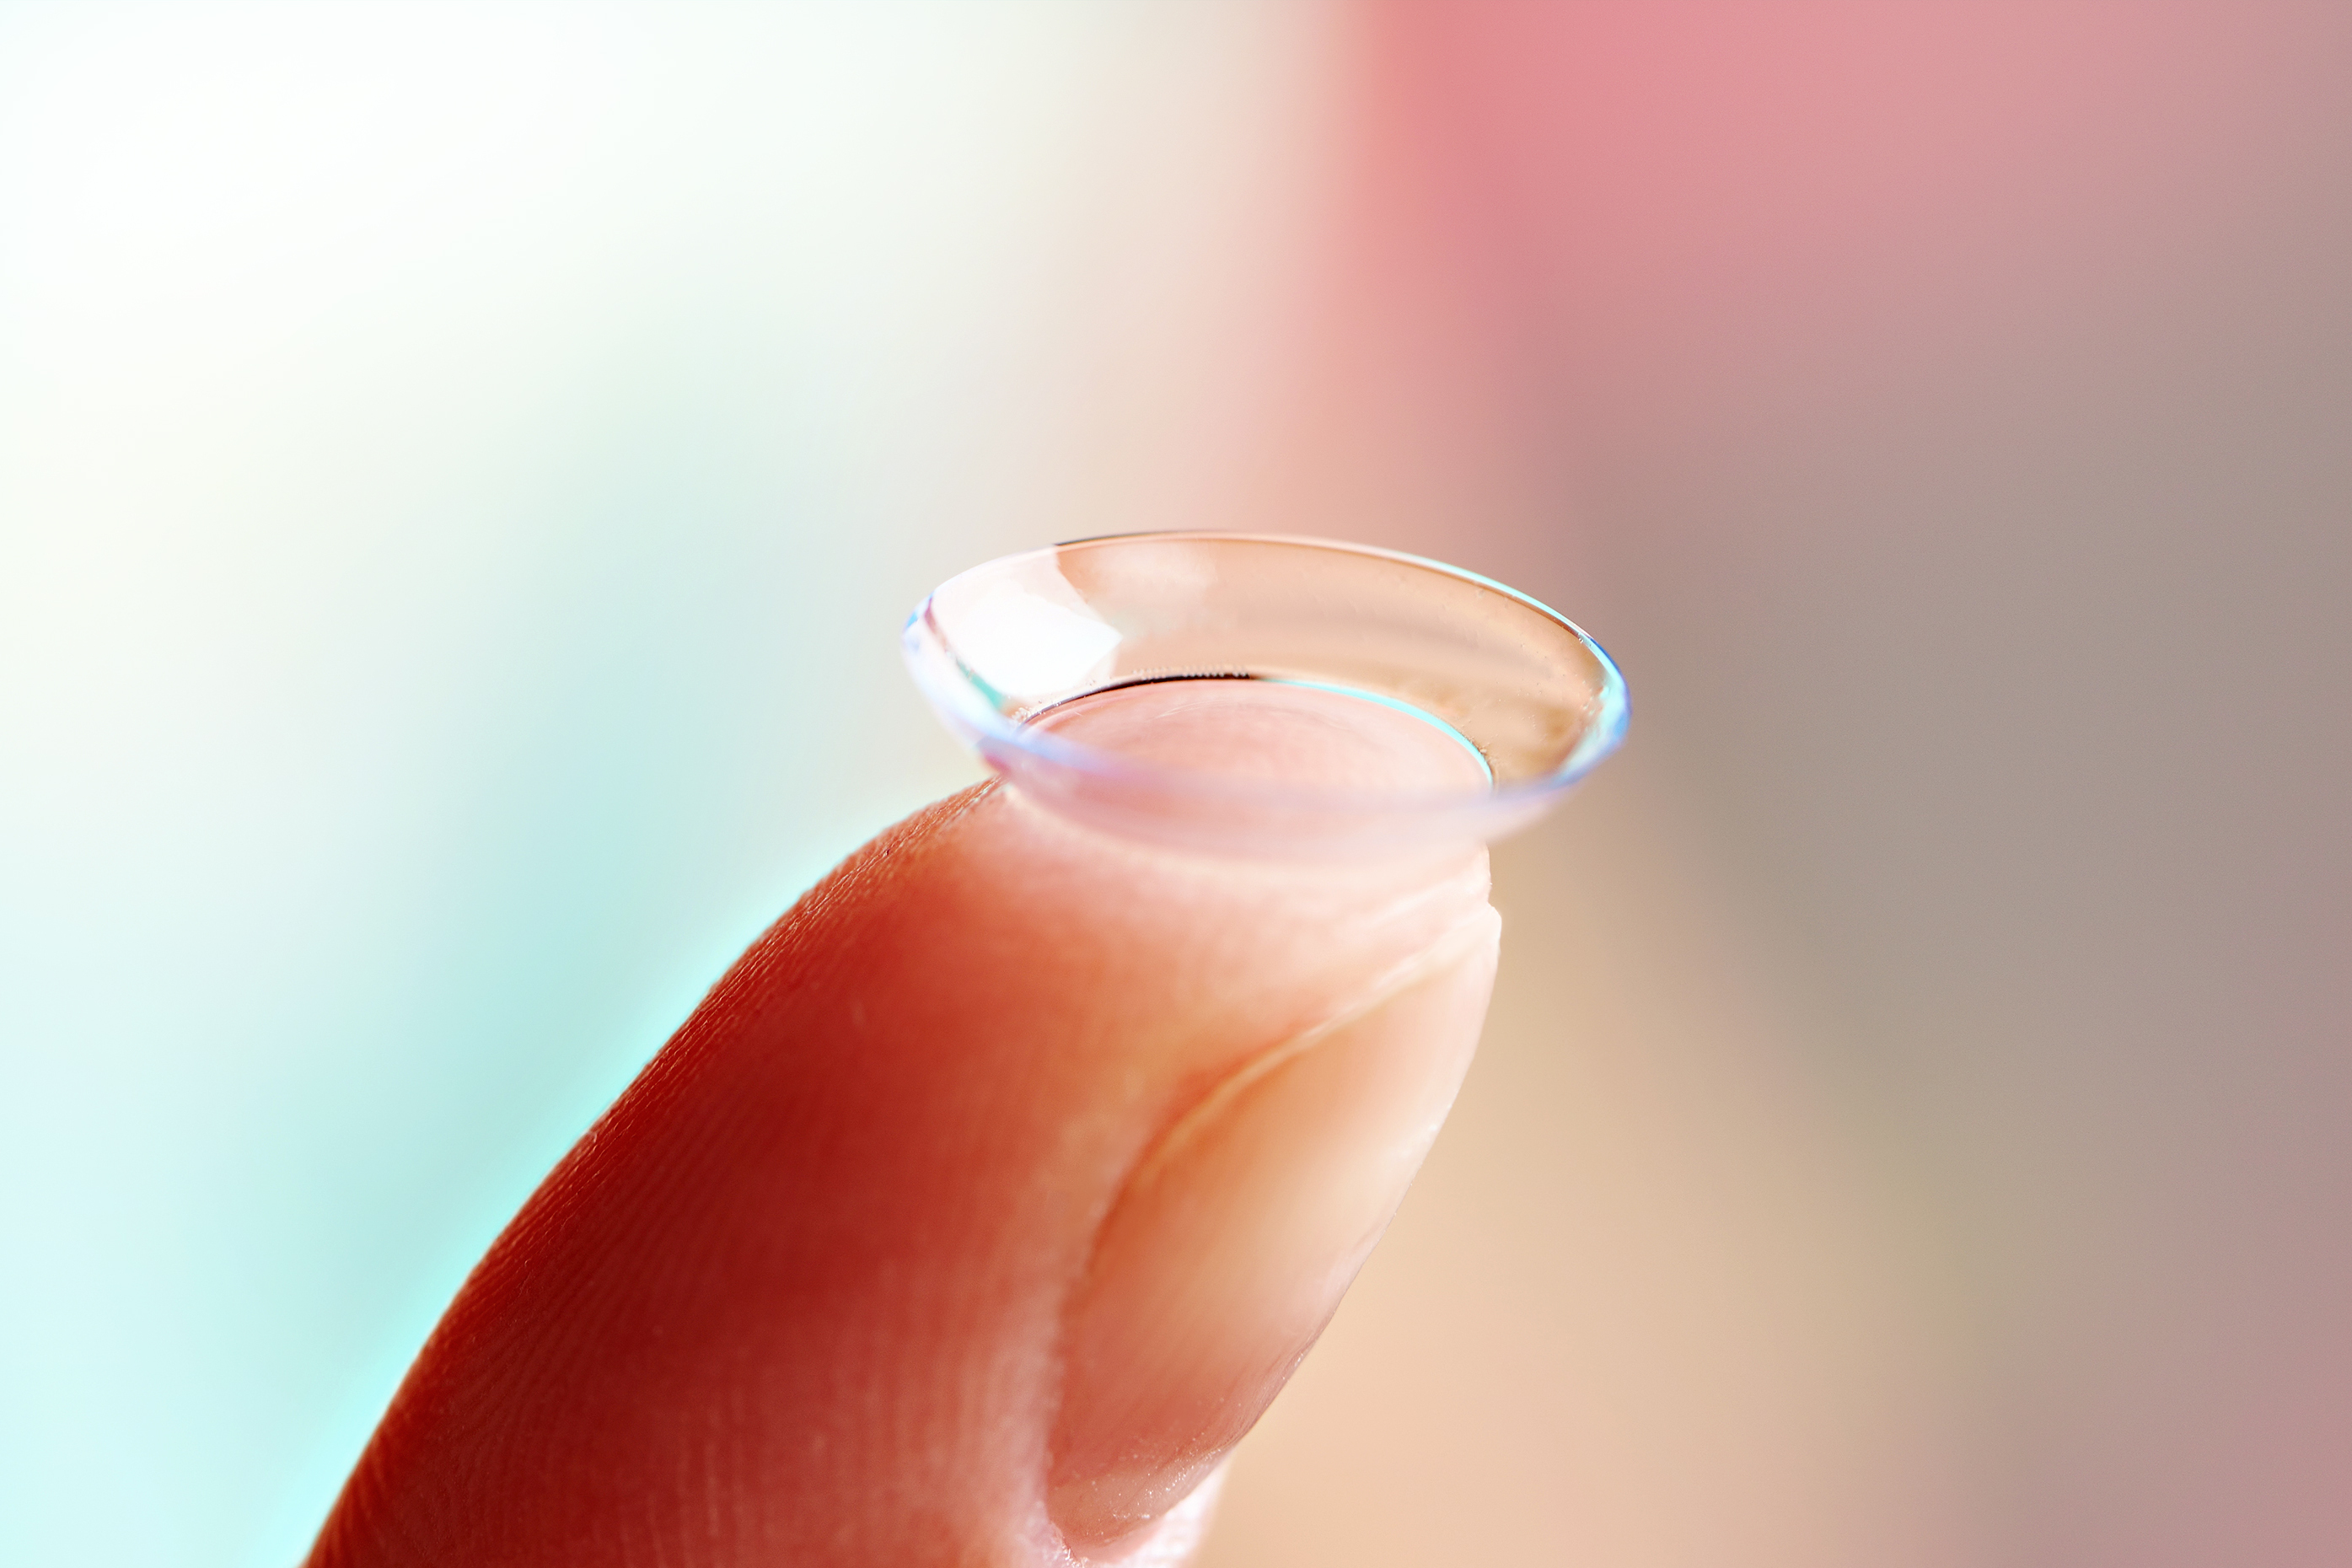 People Reveal Simple Trick to Take Contacts Out Without Using Your Hands